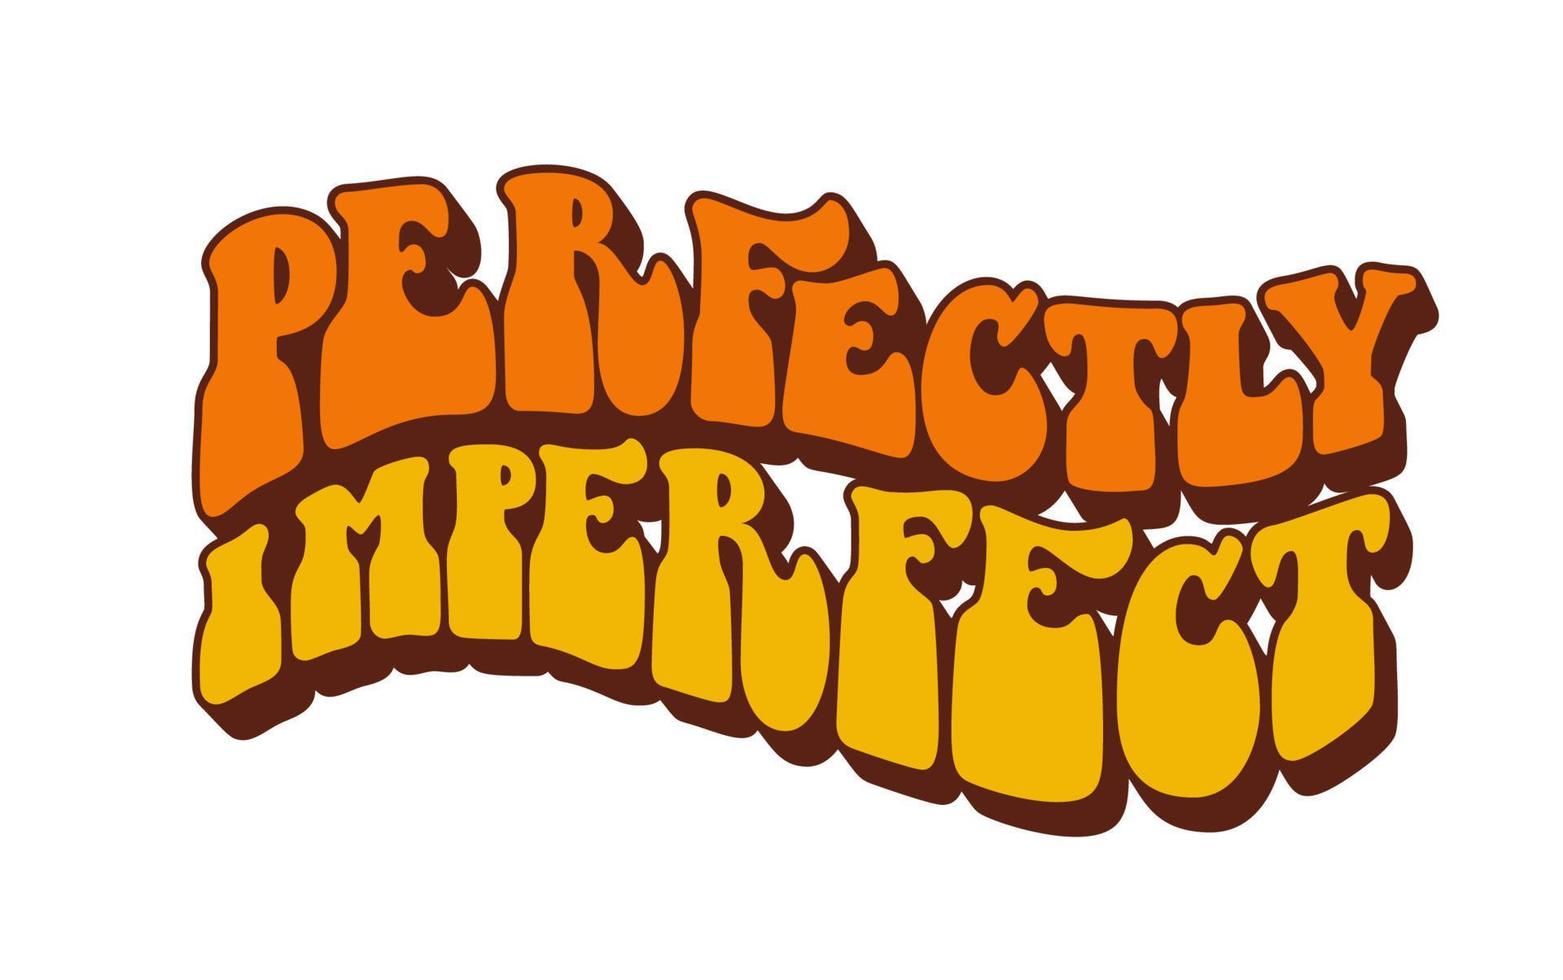 Retro cartoon font with colorful perfectly imperfect groovy lettering on white background. vector